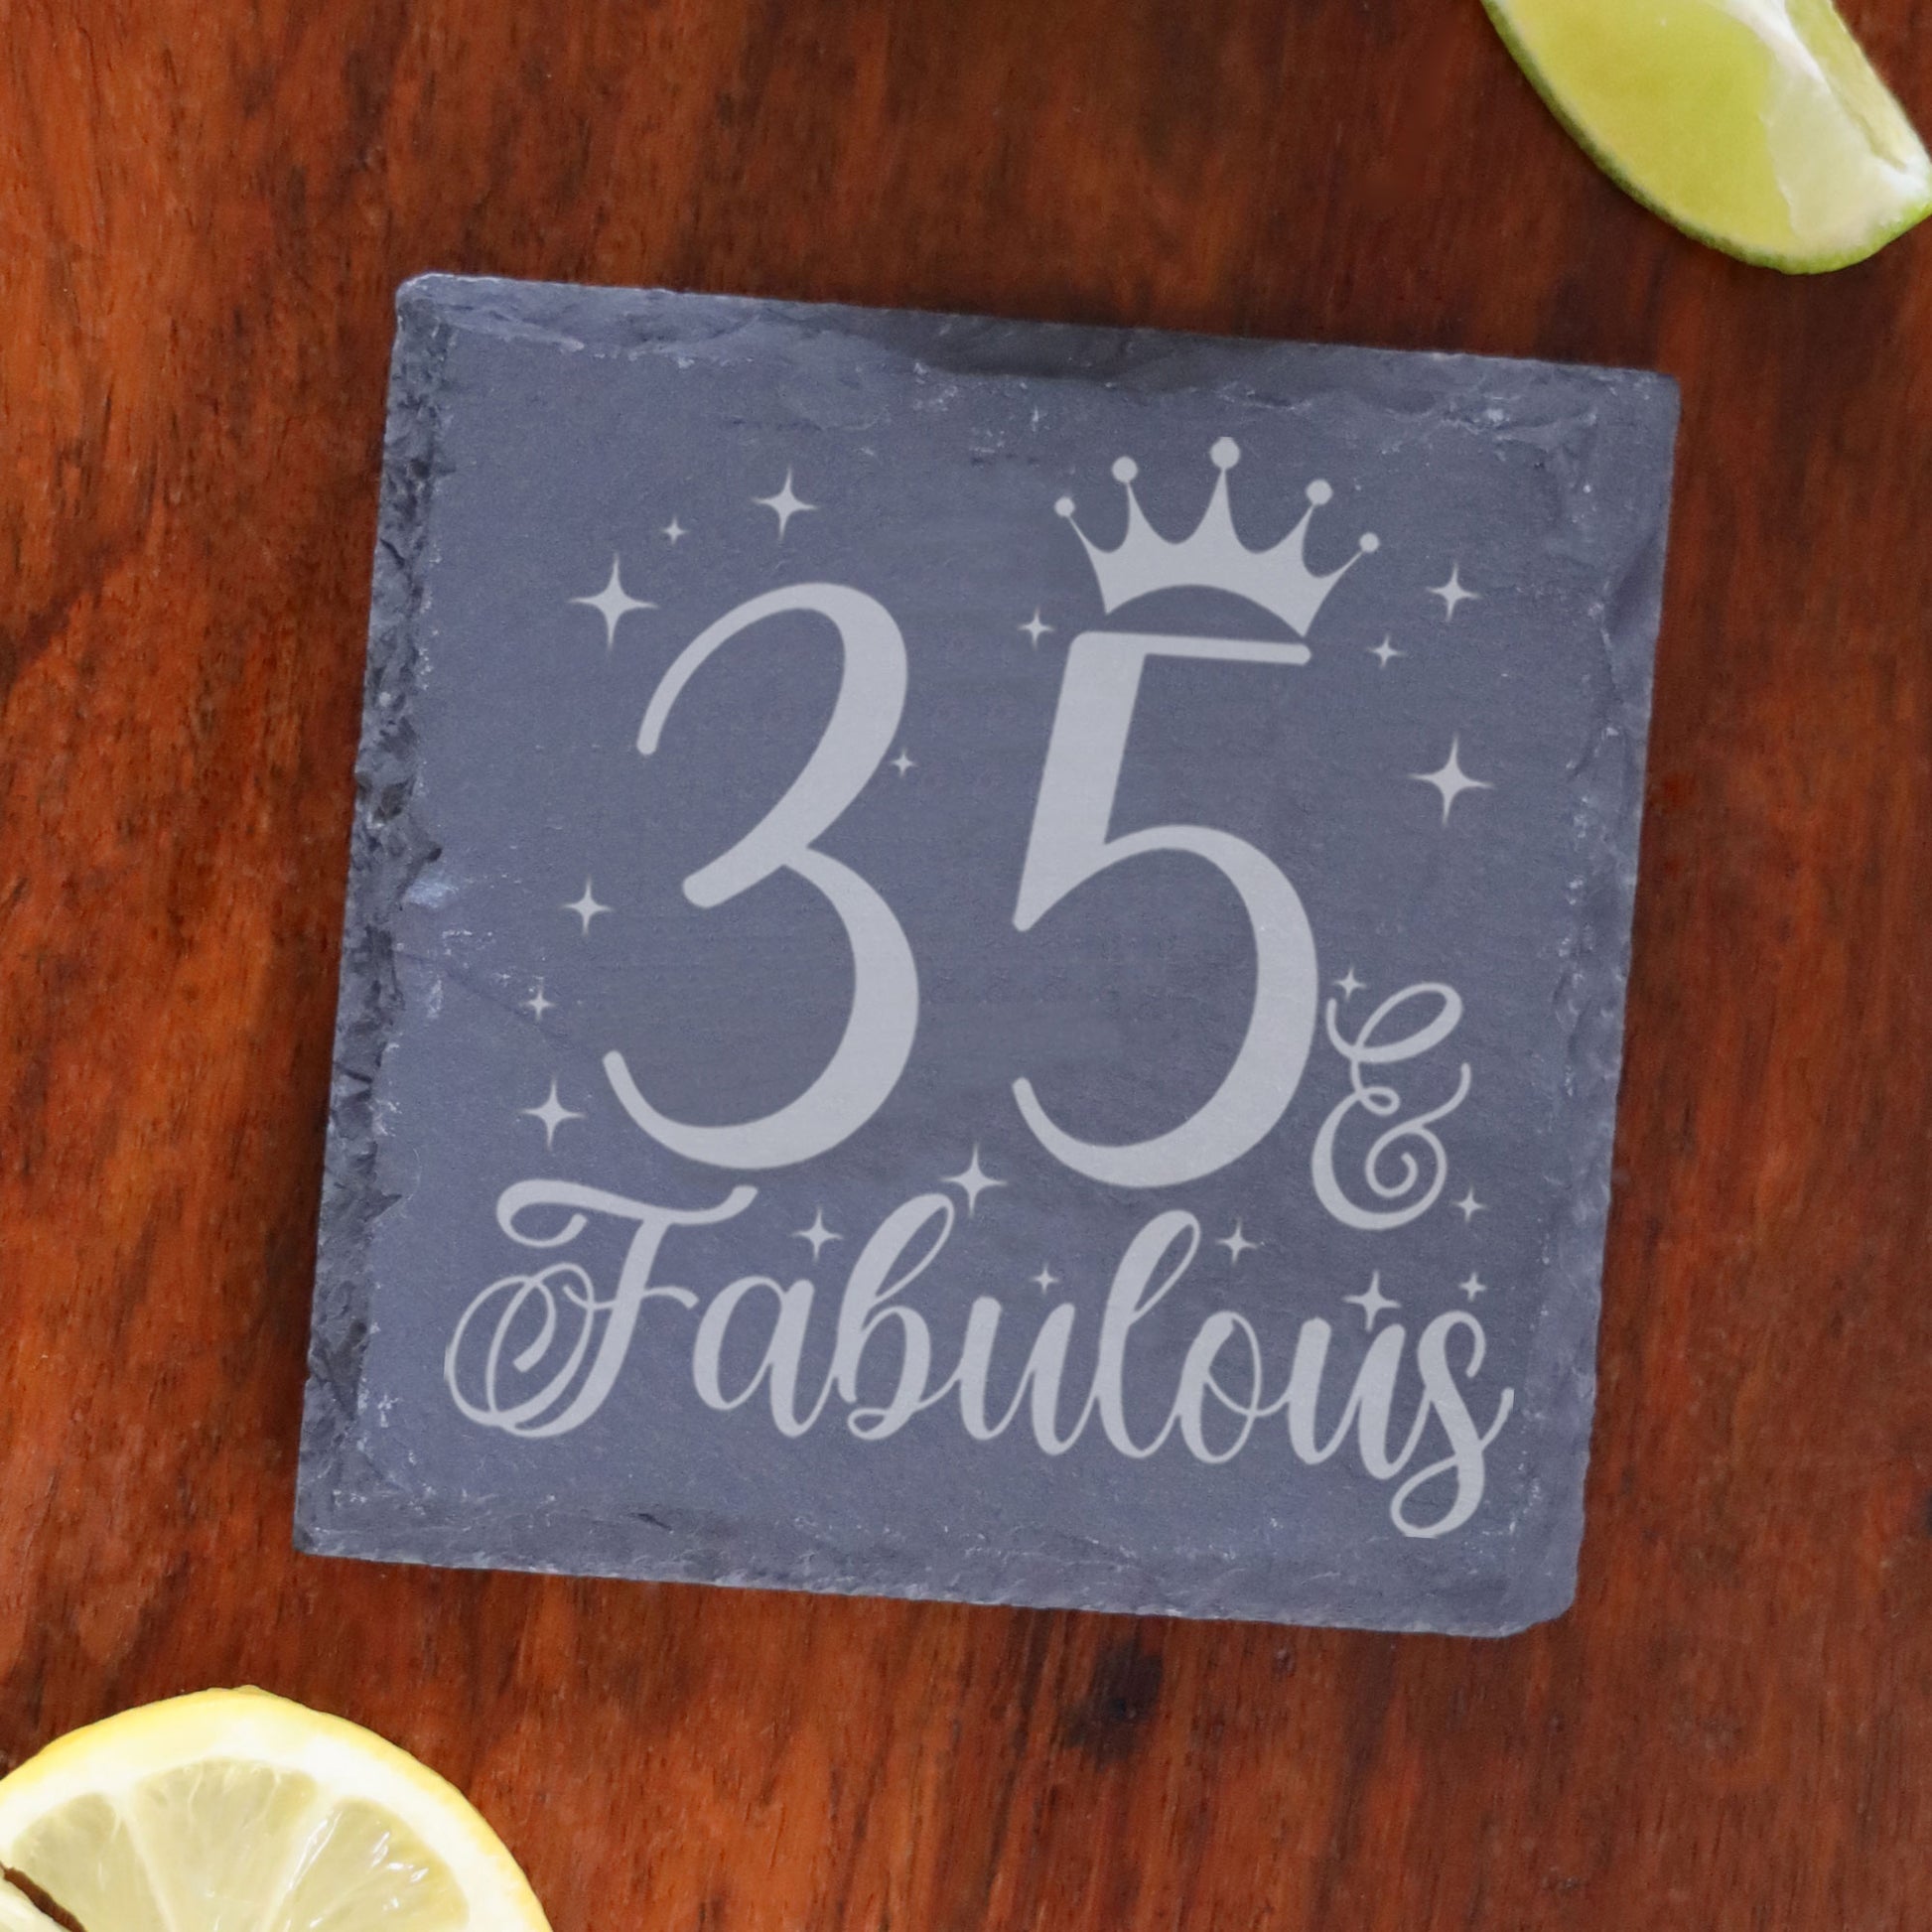 35 & Fabulous 35th Birthday Gift Engraved Wine Glass and/or Coaster Set  - Always Looking Good - Square Coaster Only  